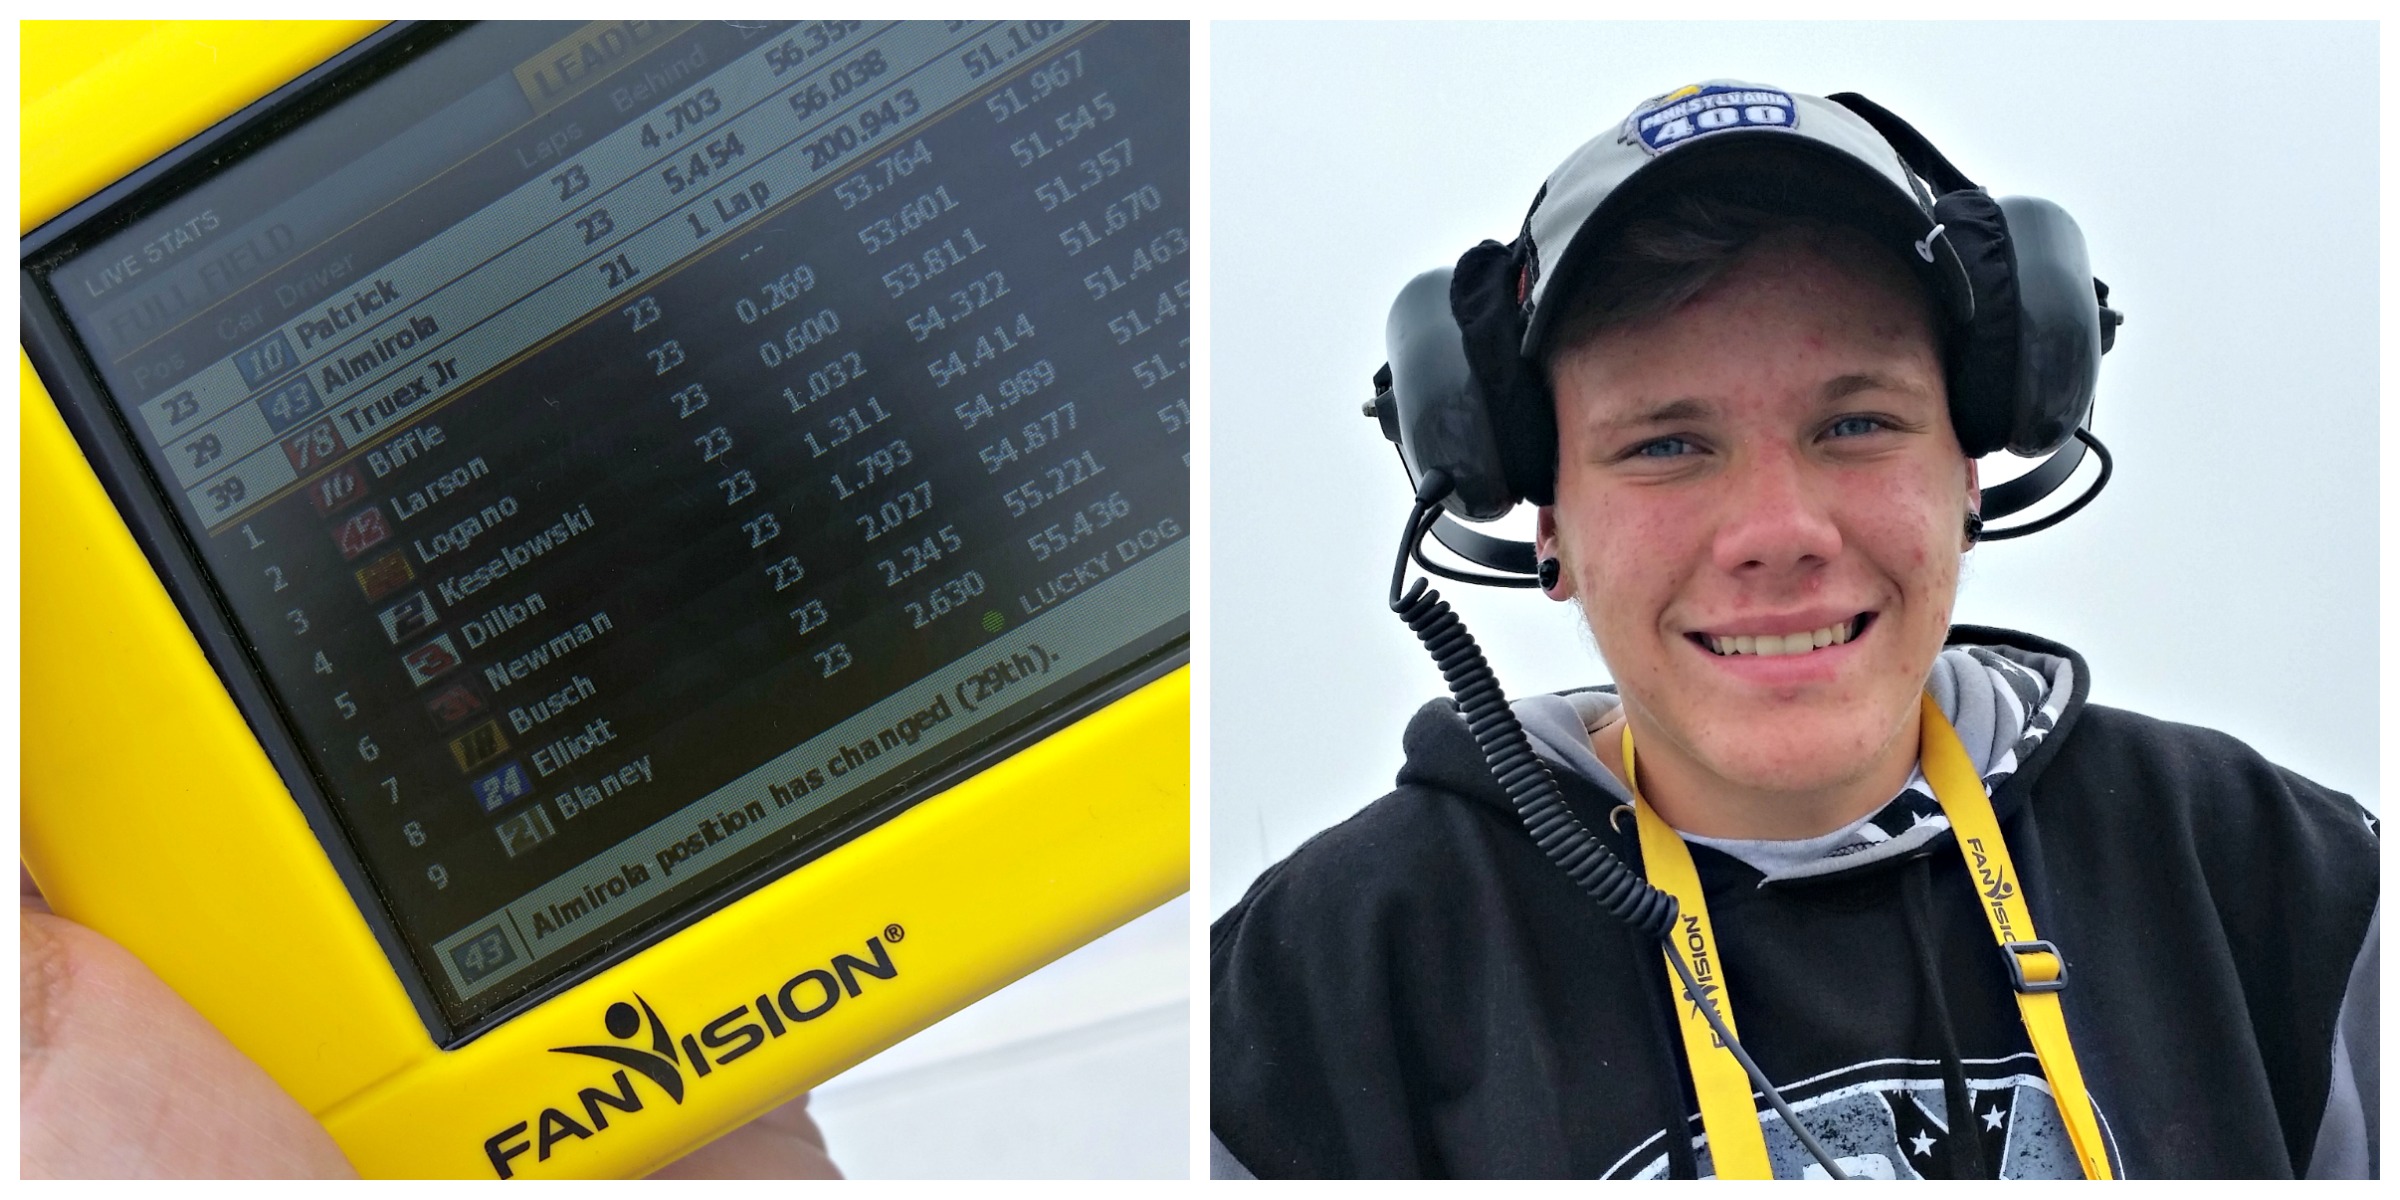 Using Fanvision while watching the race at pocono raceway